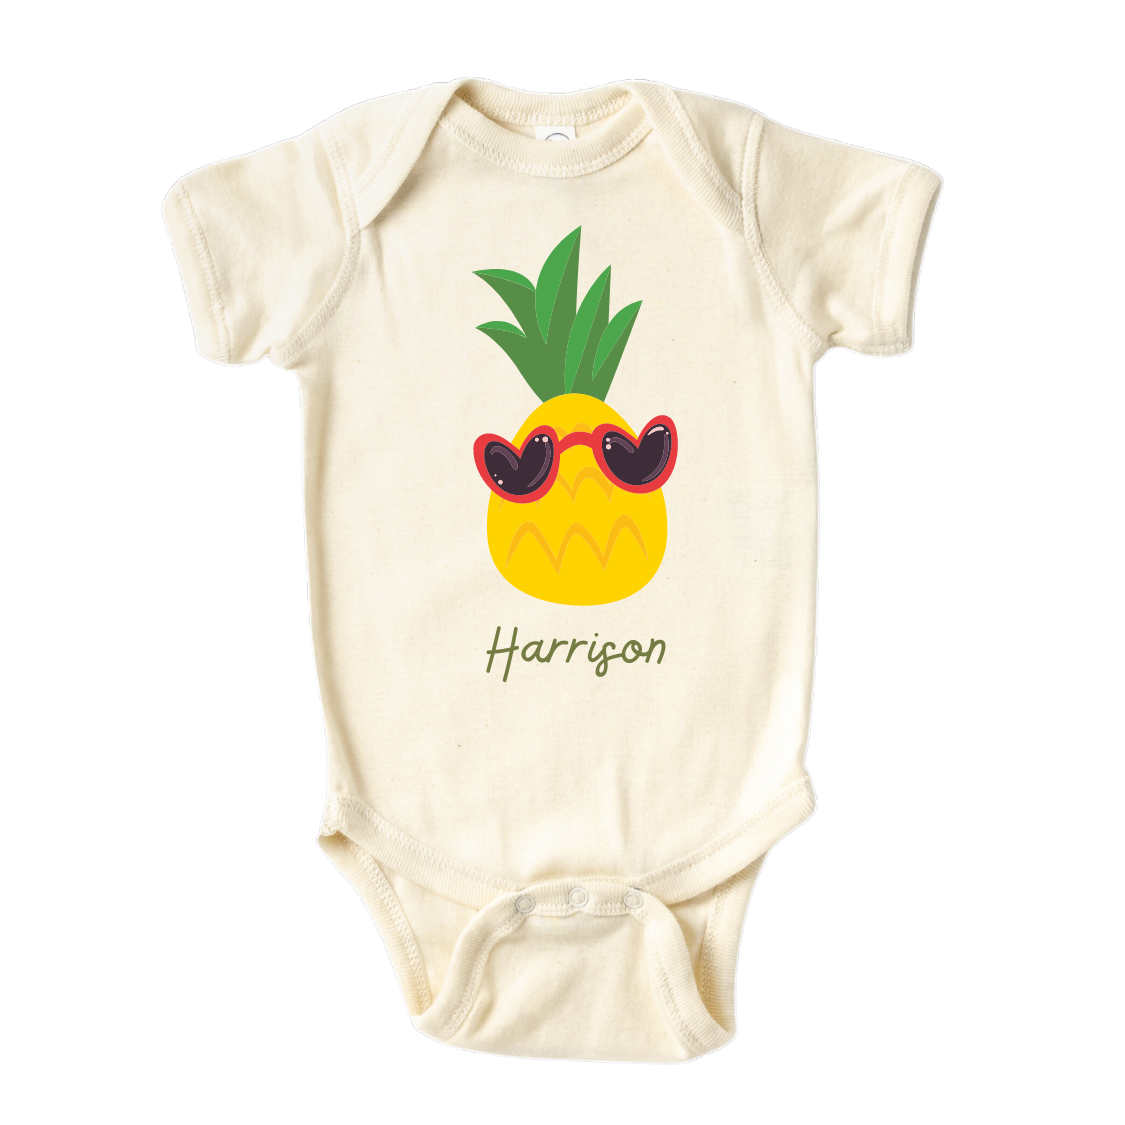 personalized baby girl gifts custom baby onesie infant clothes cute baby girl clothes funny baby clothes newborn onesies unisex newborn boy onesies funny onesies for babies cute baby stuff, baby girl clothes baby essentials baby boy clothes